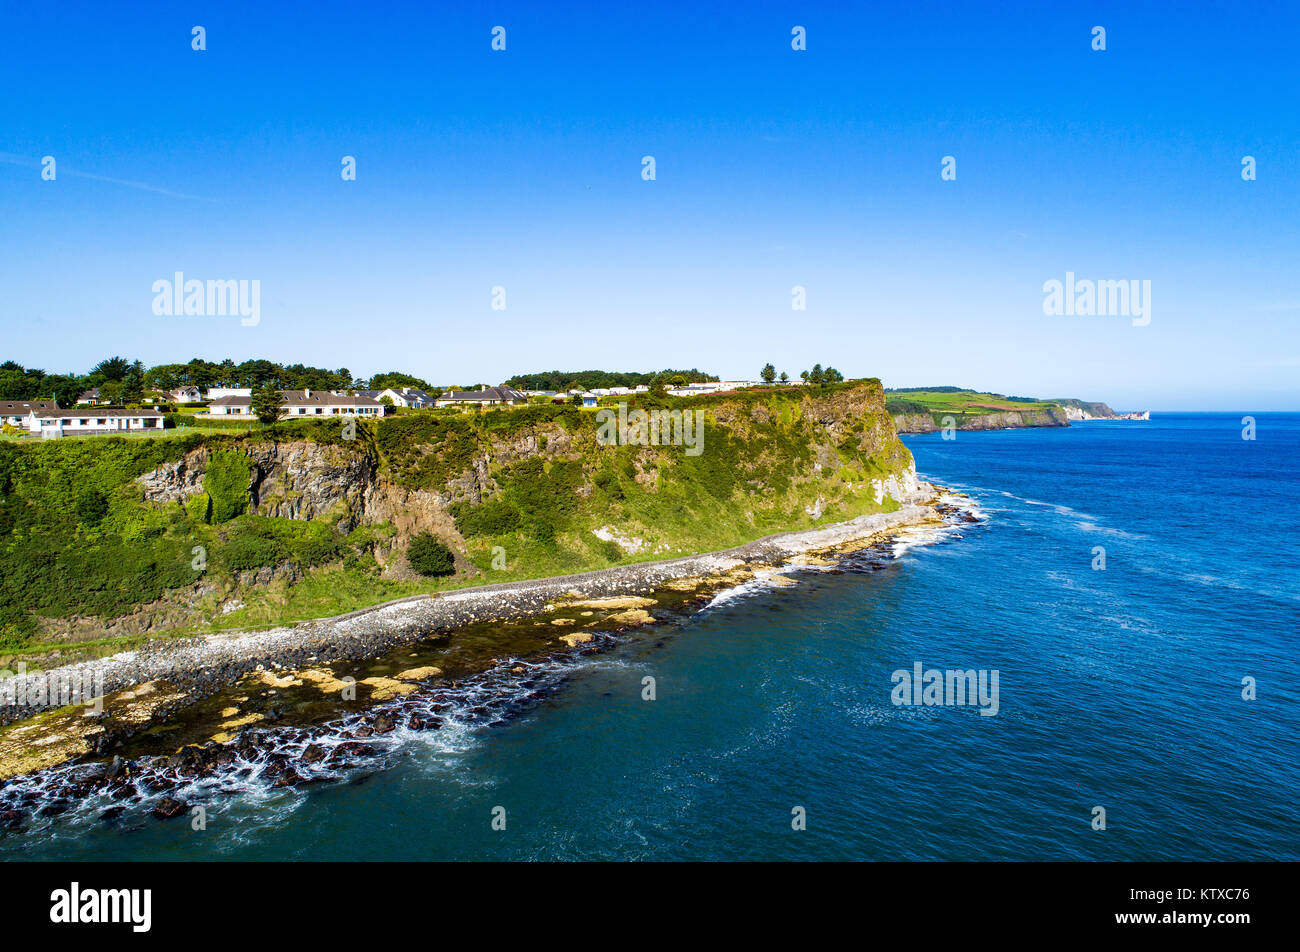 Atlantic coast with steep cliffs at Ballycastle, County Antrim, Northern Ireland, UK. Aerial view Stock Photo